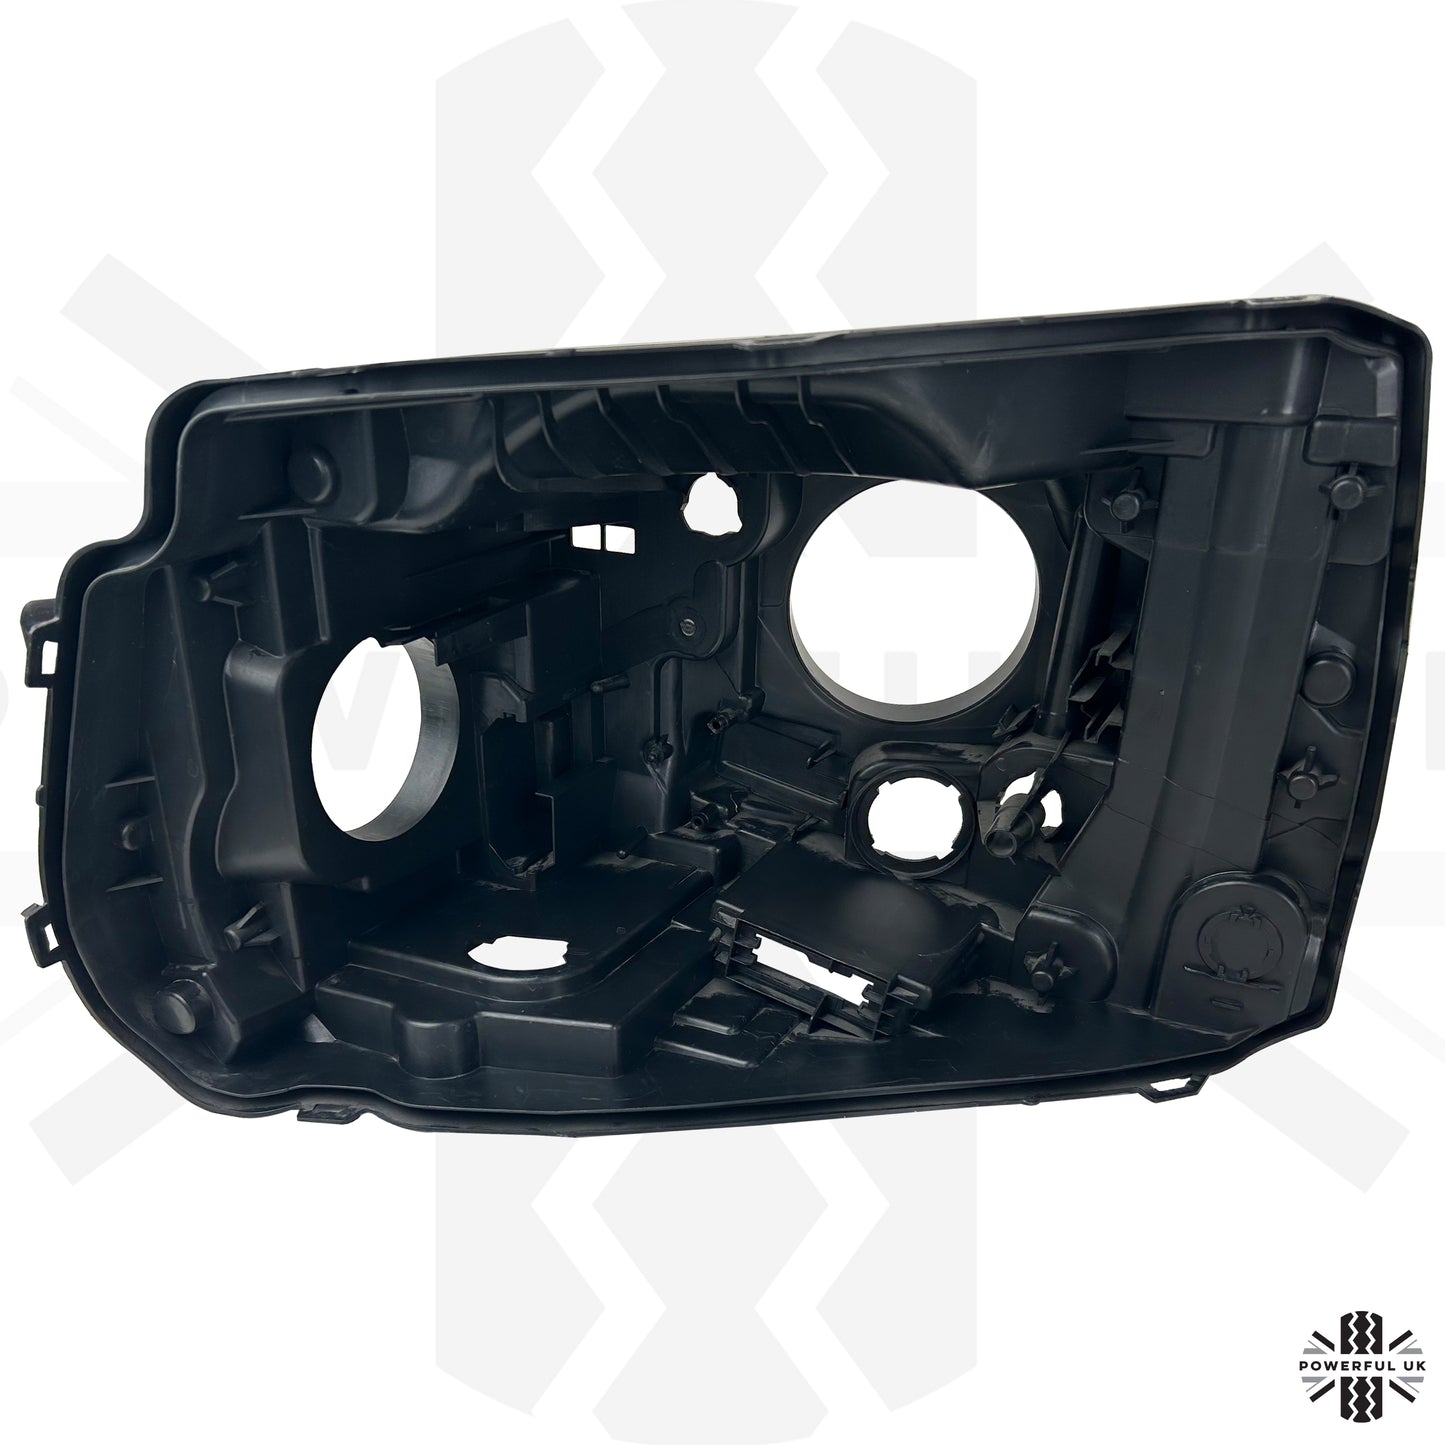 Replacement Headlight Rear Housing - Late Type - for Discovery 4 2014-2016 - LH